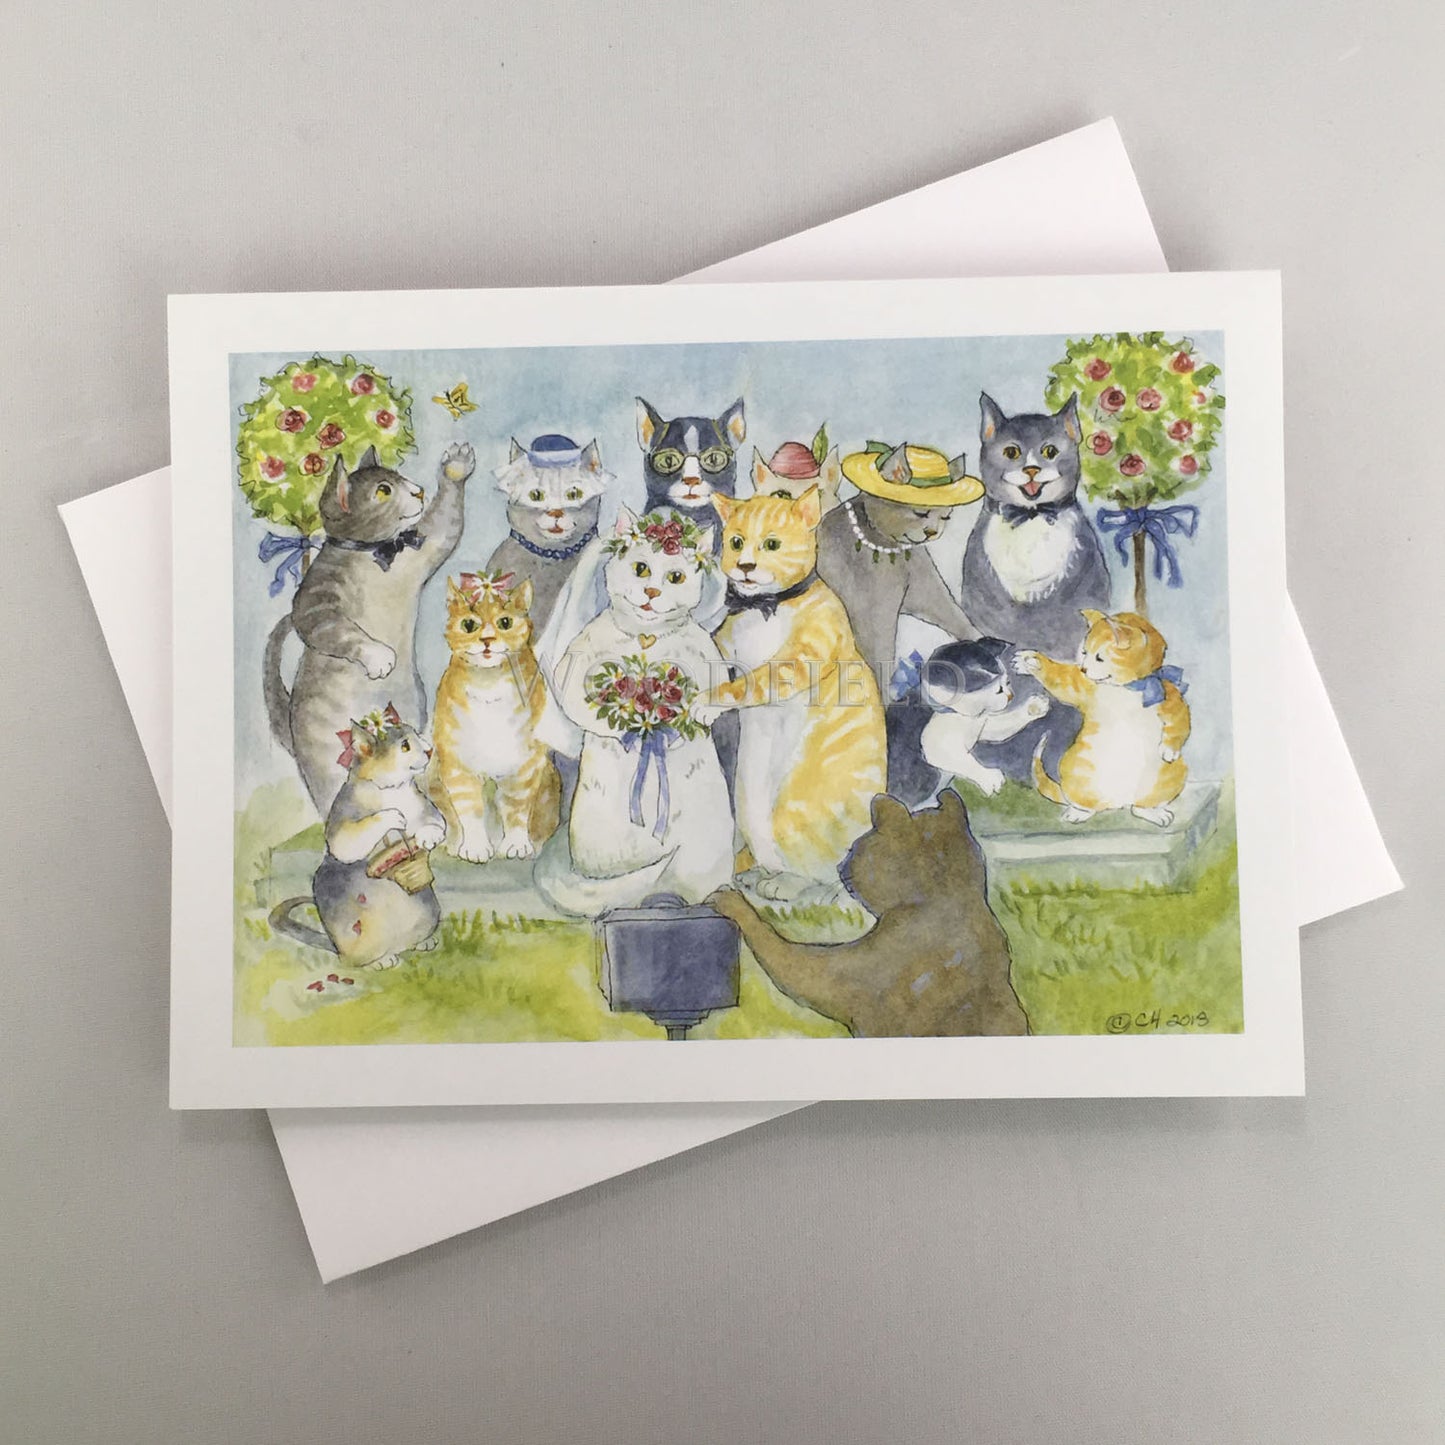 Wedding Party - Greeting Card by Woodfield Press